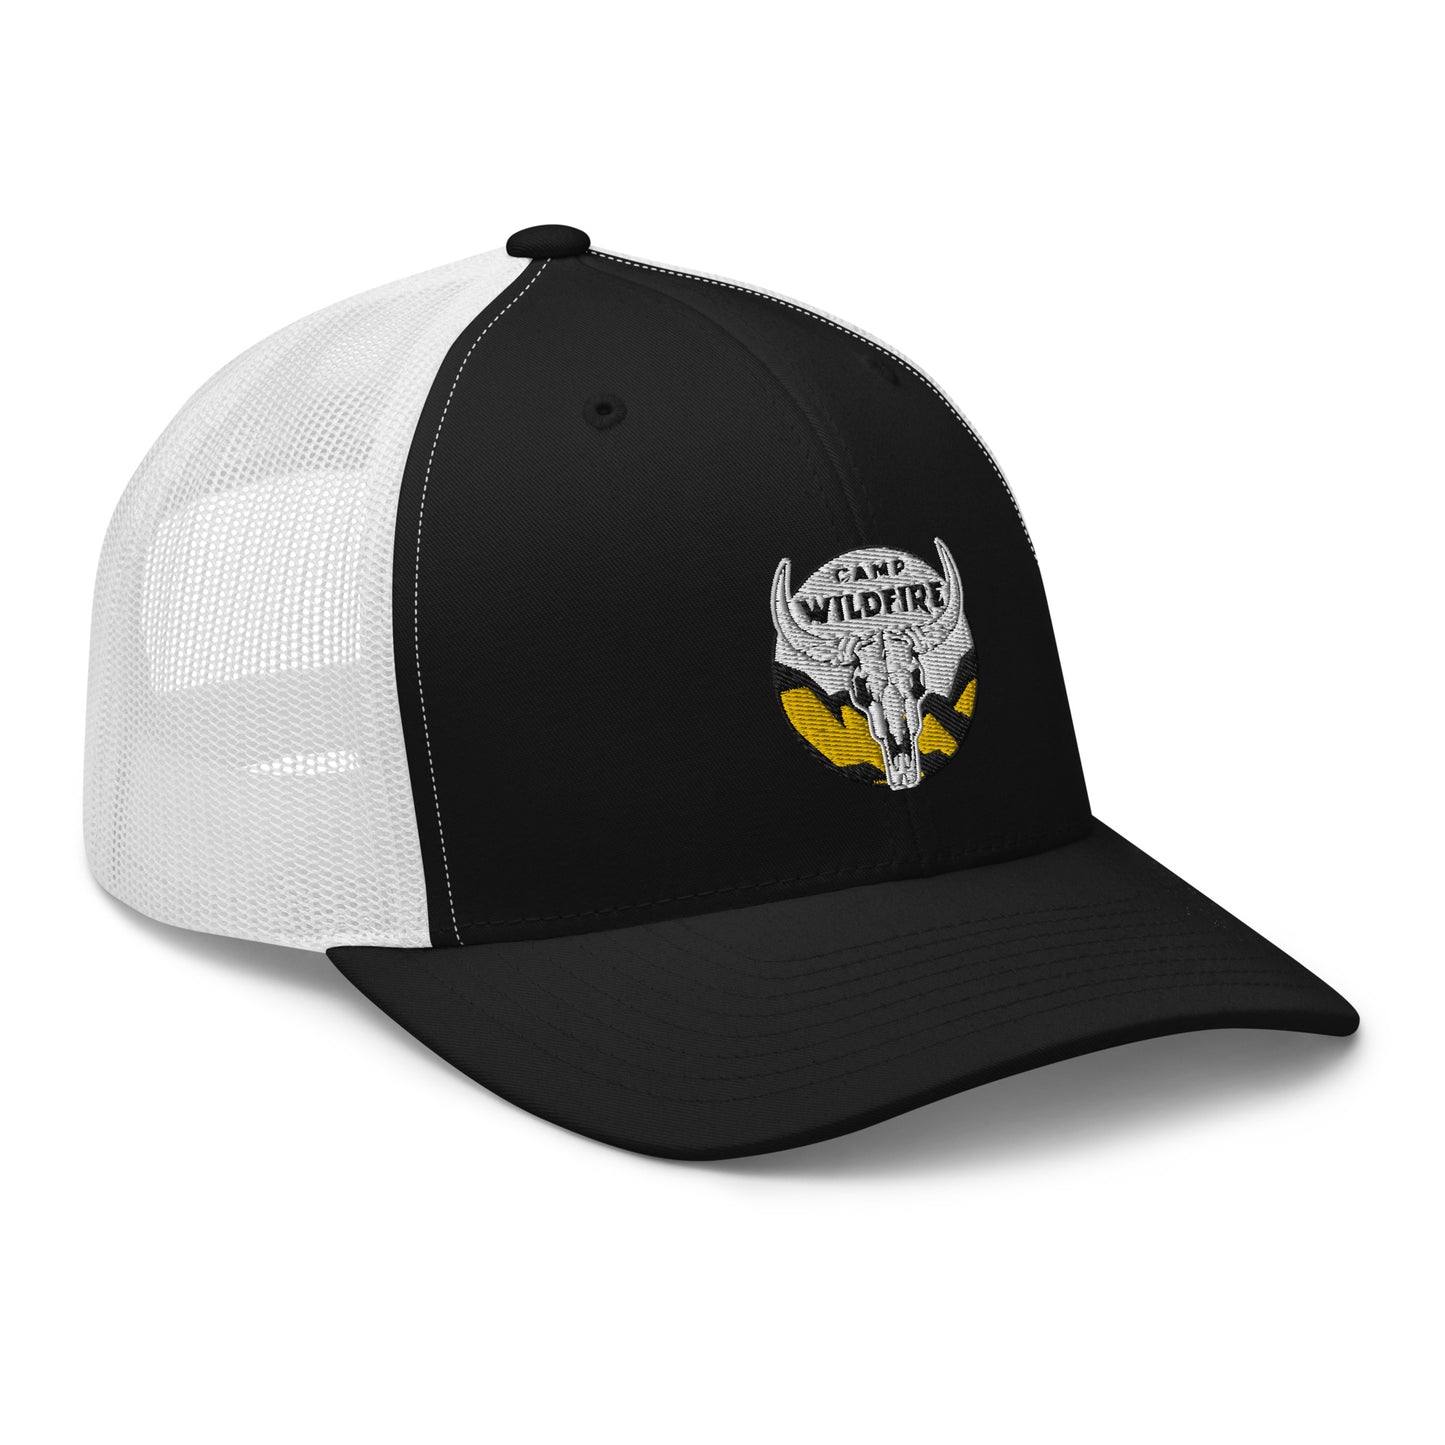 Wildfire Cigars embroidered bison skull retro trucker in black and white facing front right